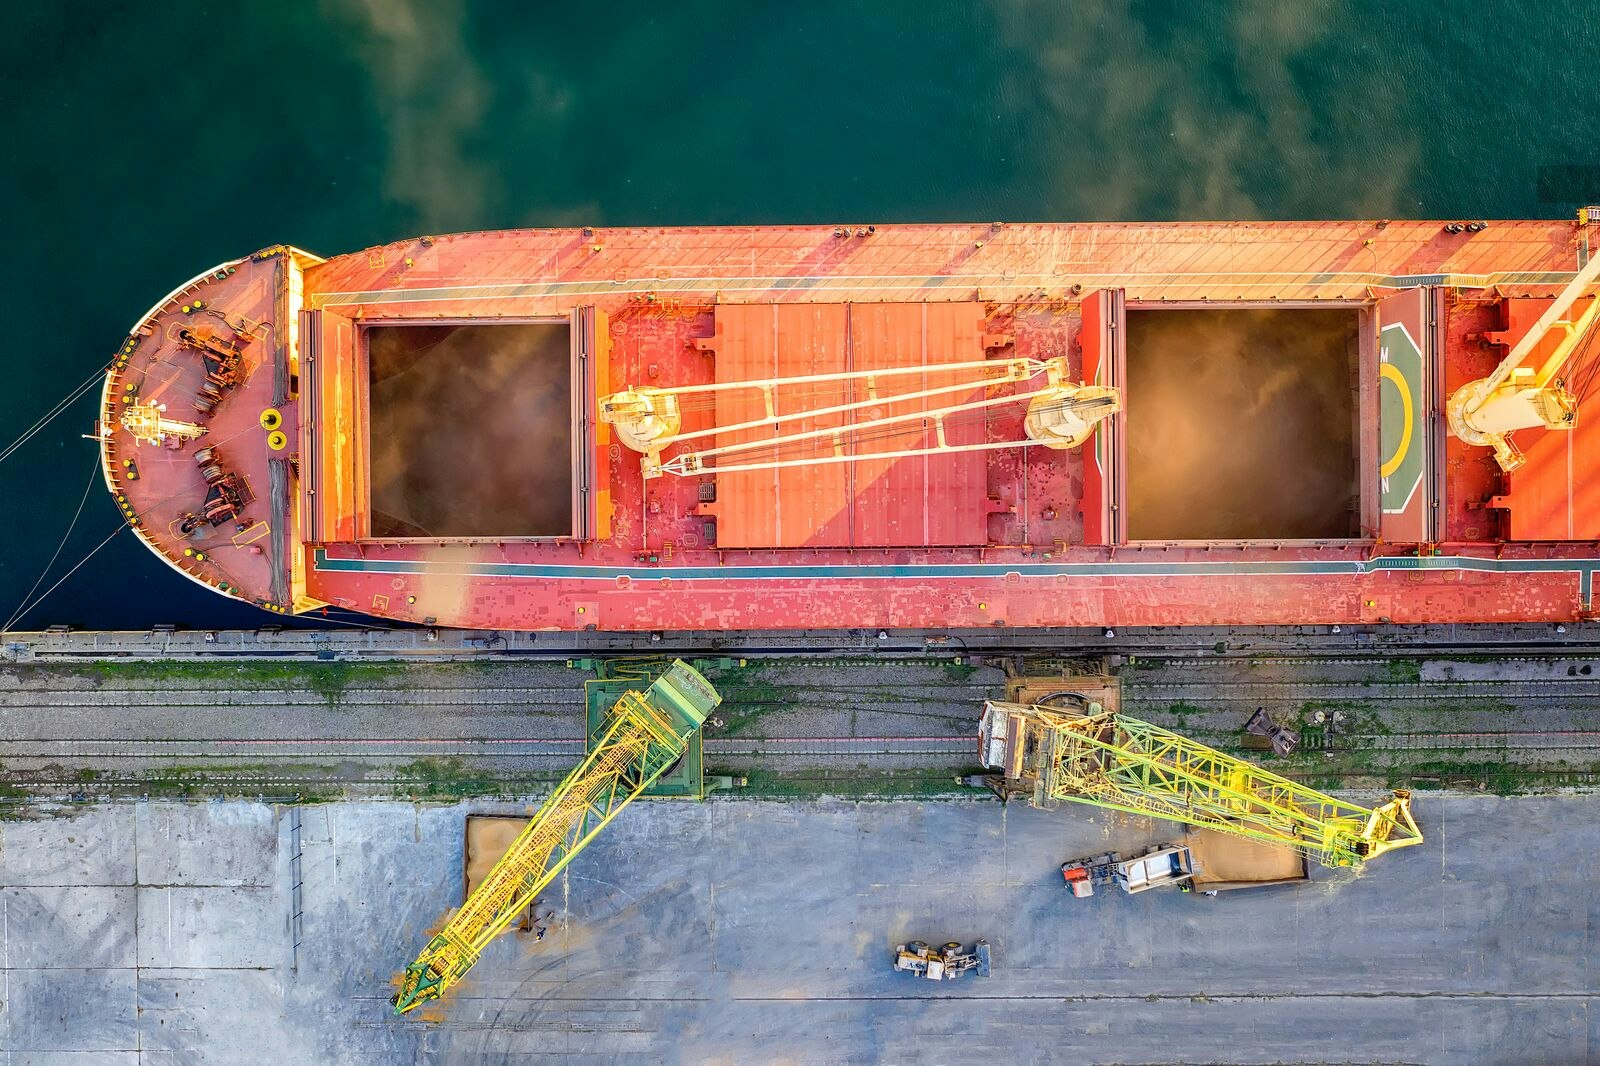 Top view of a Large Ship Loading Grain for Export